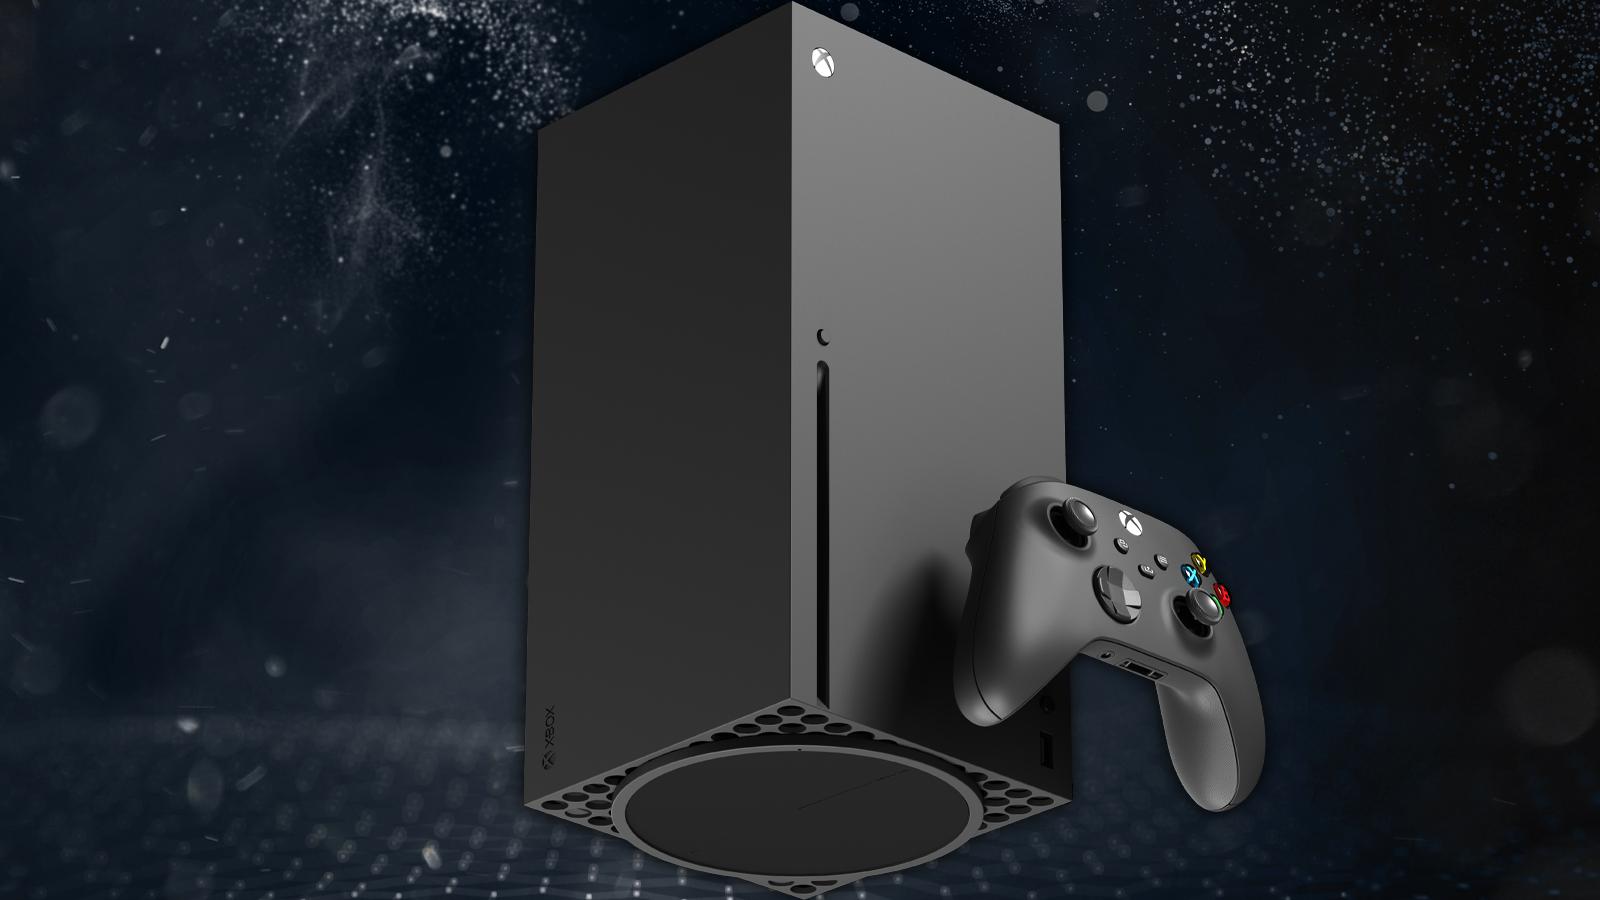 Next-gen Xbox: everything we know about the Xbox Series X and S follow-up